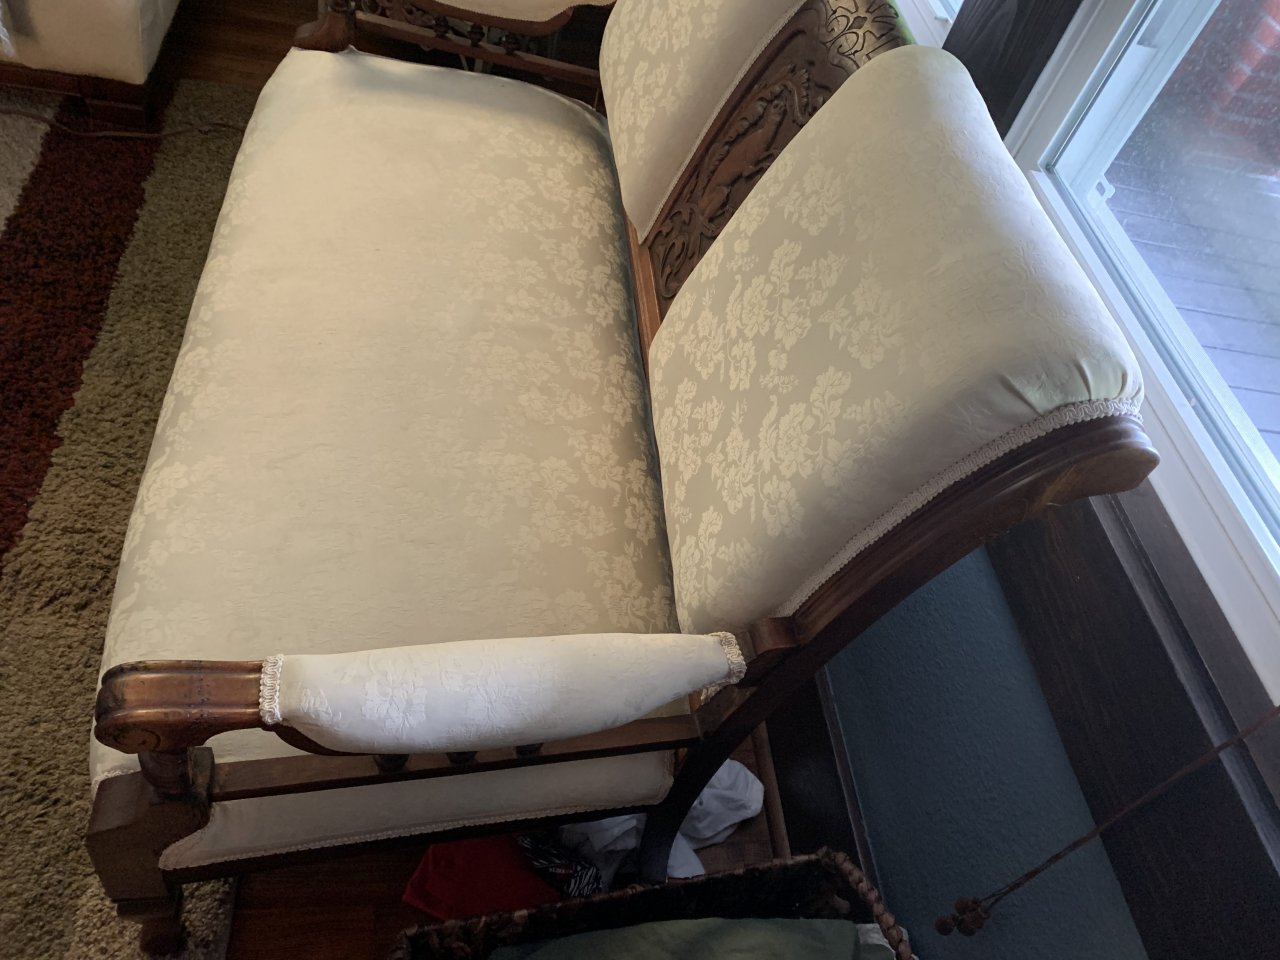 Settee Purchased In St. Louis, MO | My Antique Furniture Collection